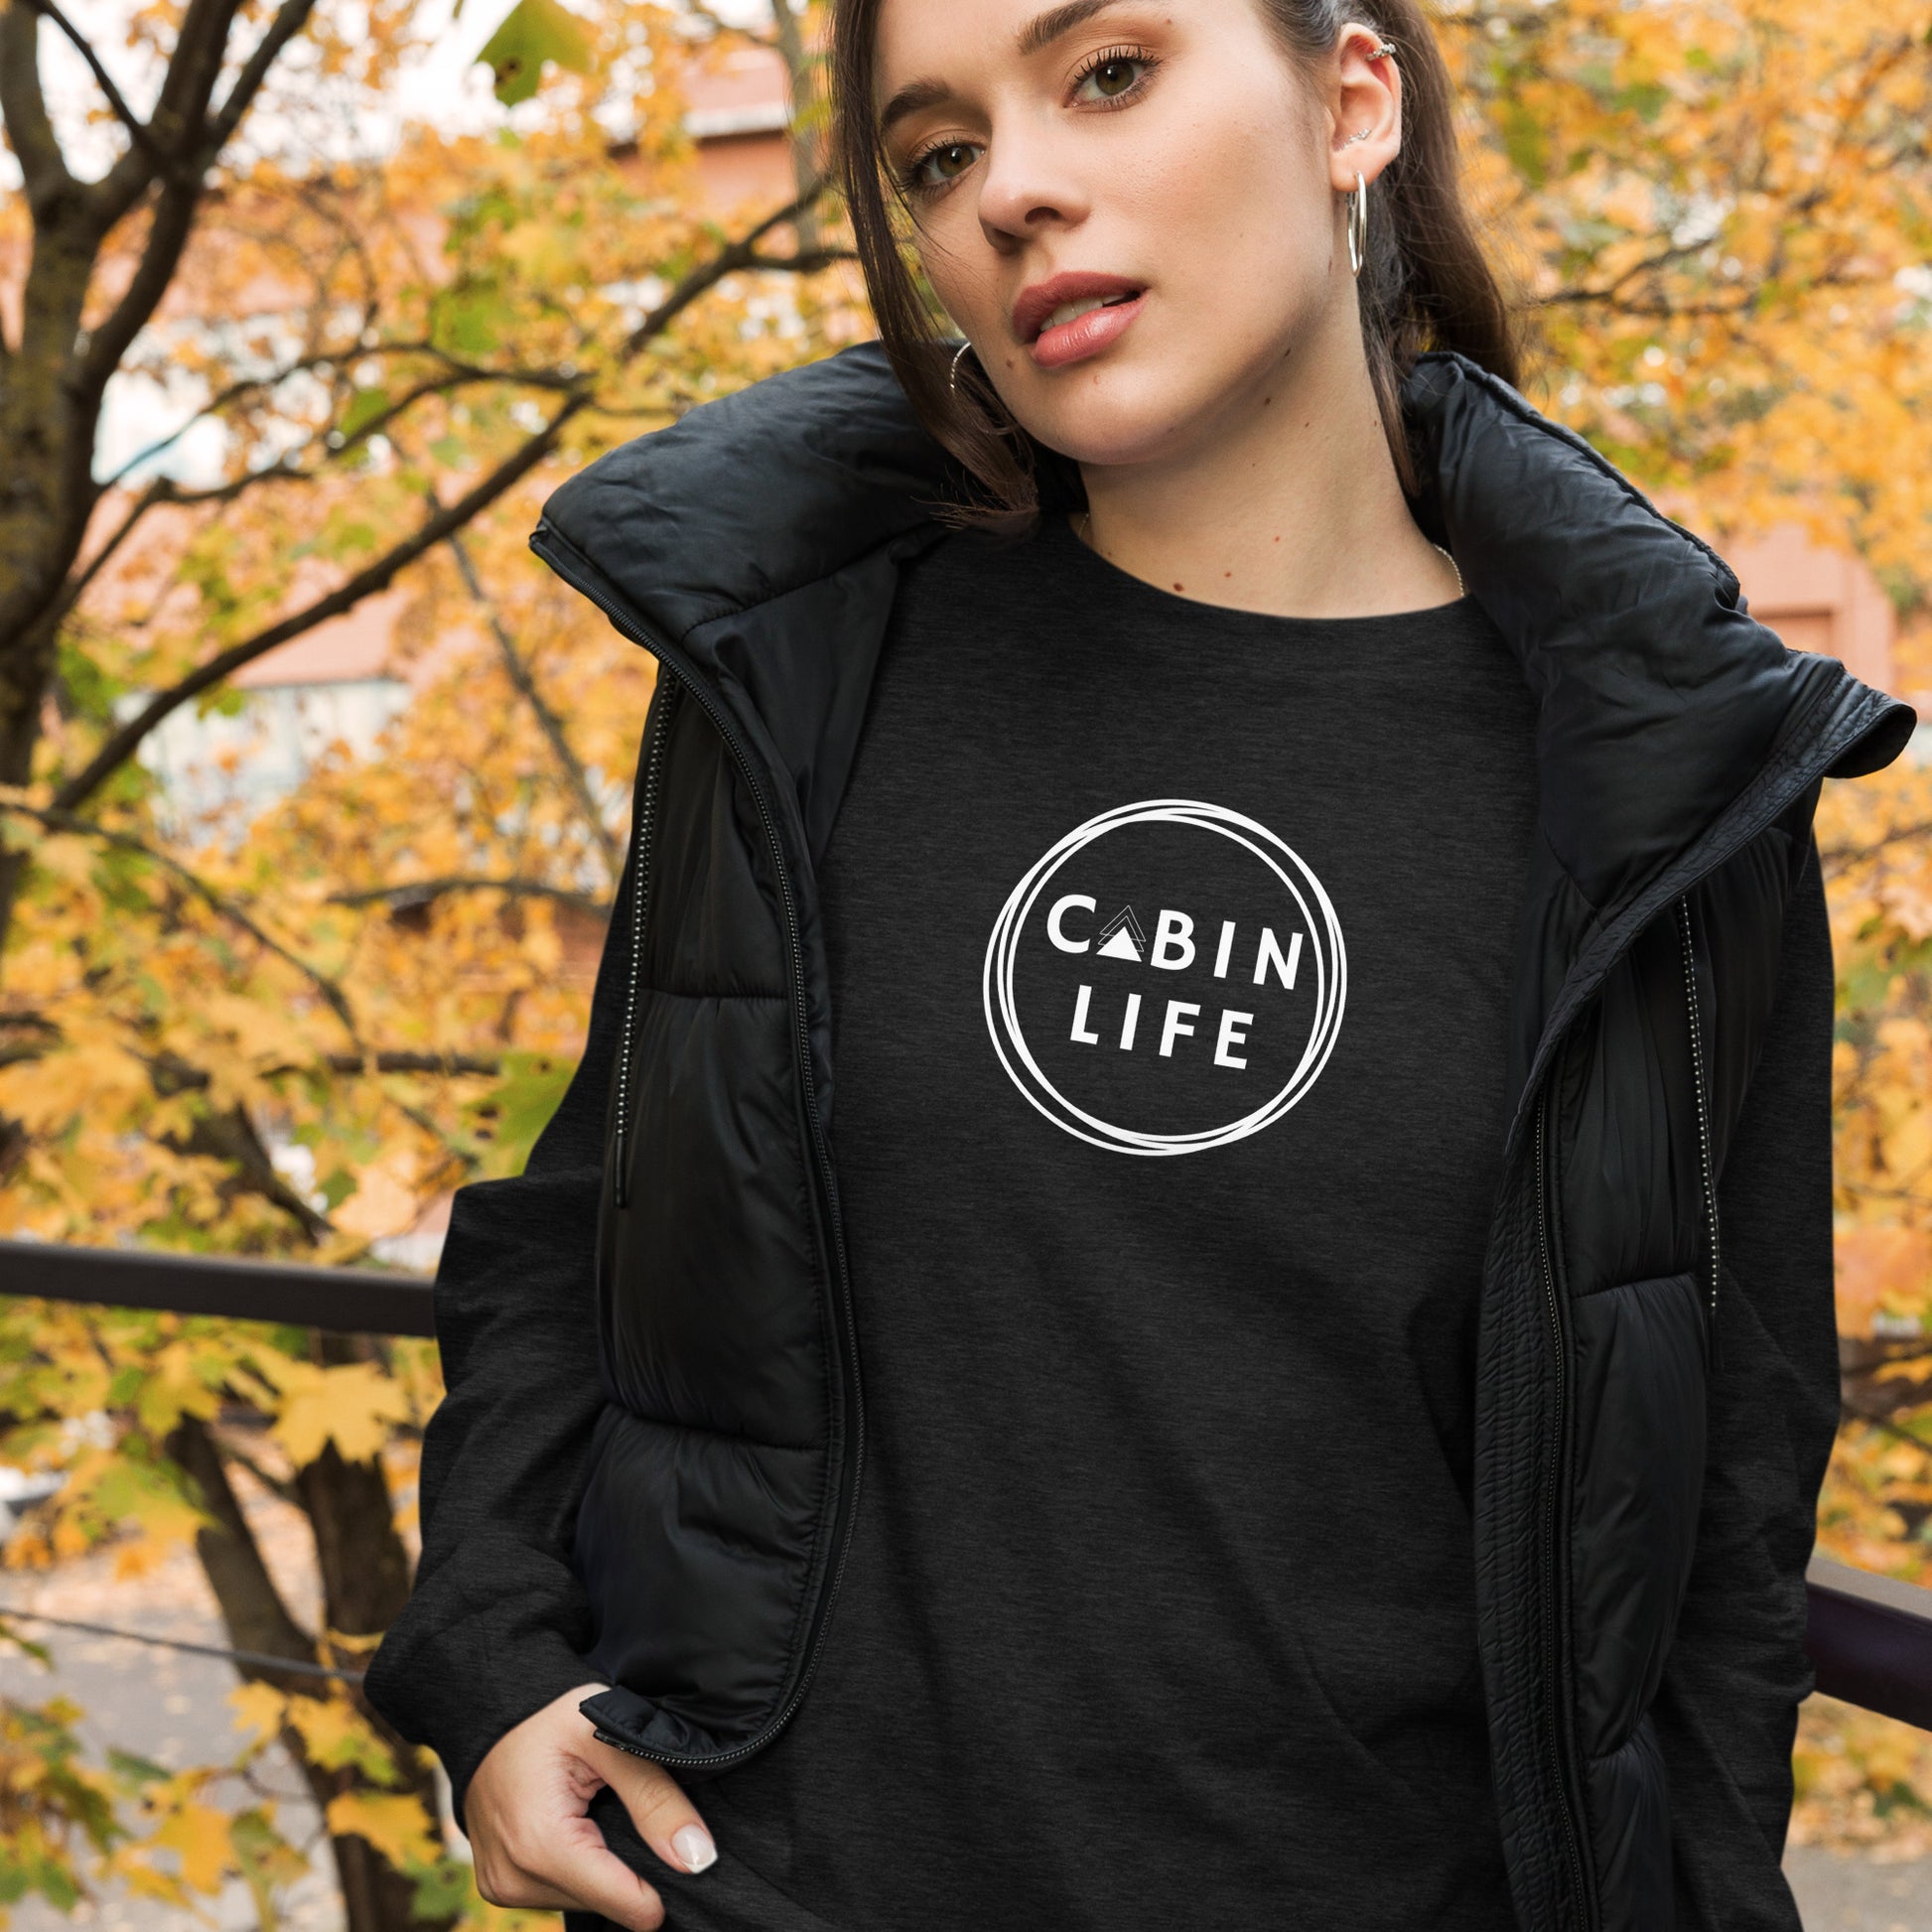 cabin life tshirt longsleeve t-shirt top shirt cozy clothing aframe a-frame woods forest wear circle graphic triangle comfy bella canvas 